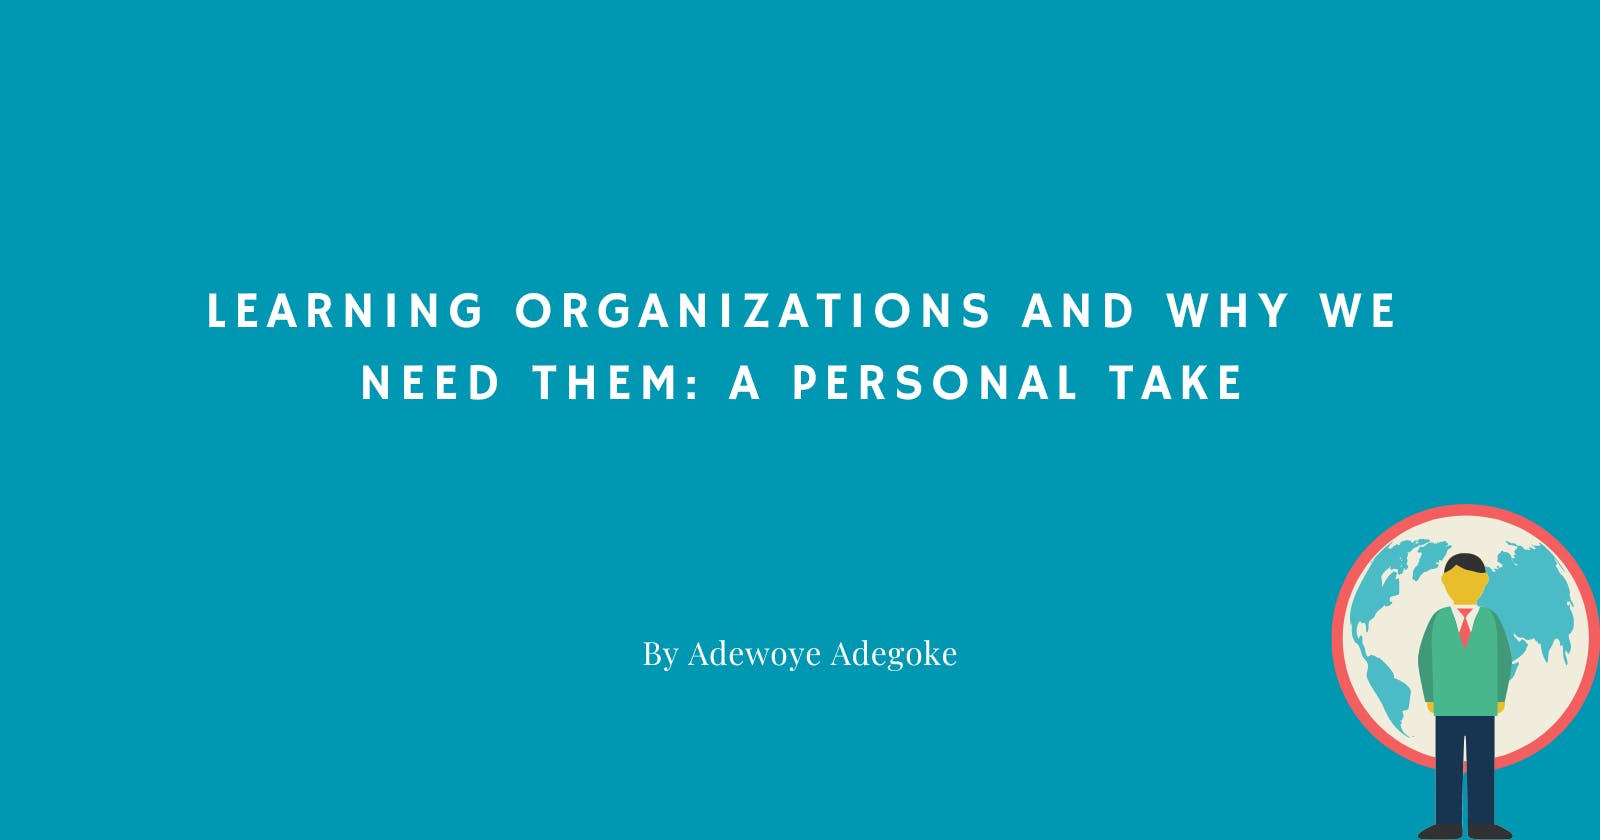 Learning Organizations and Why We Need Them: A Personal Take